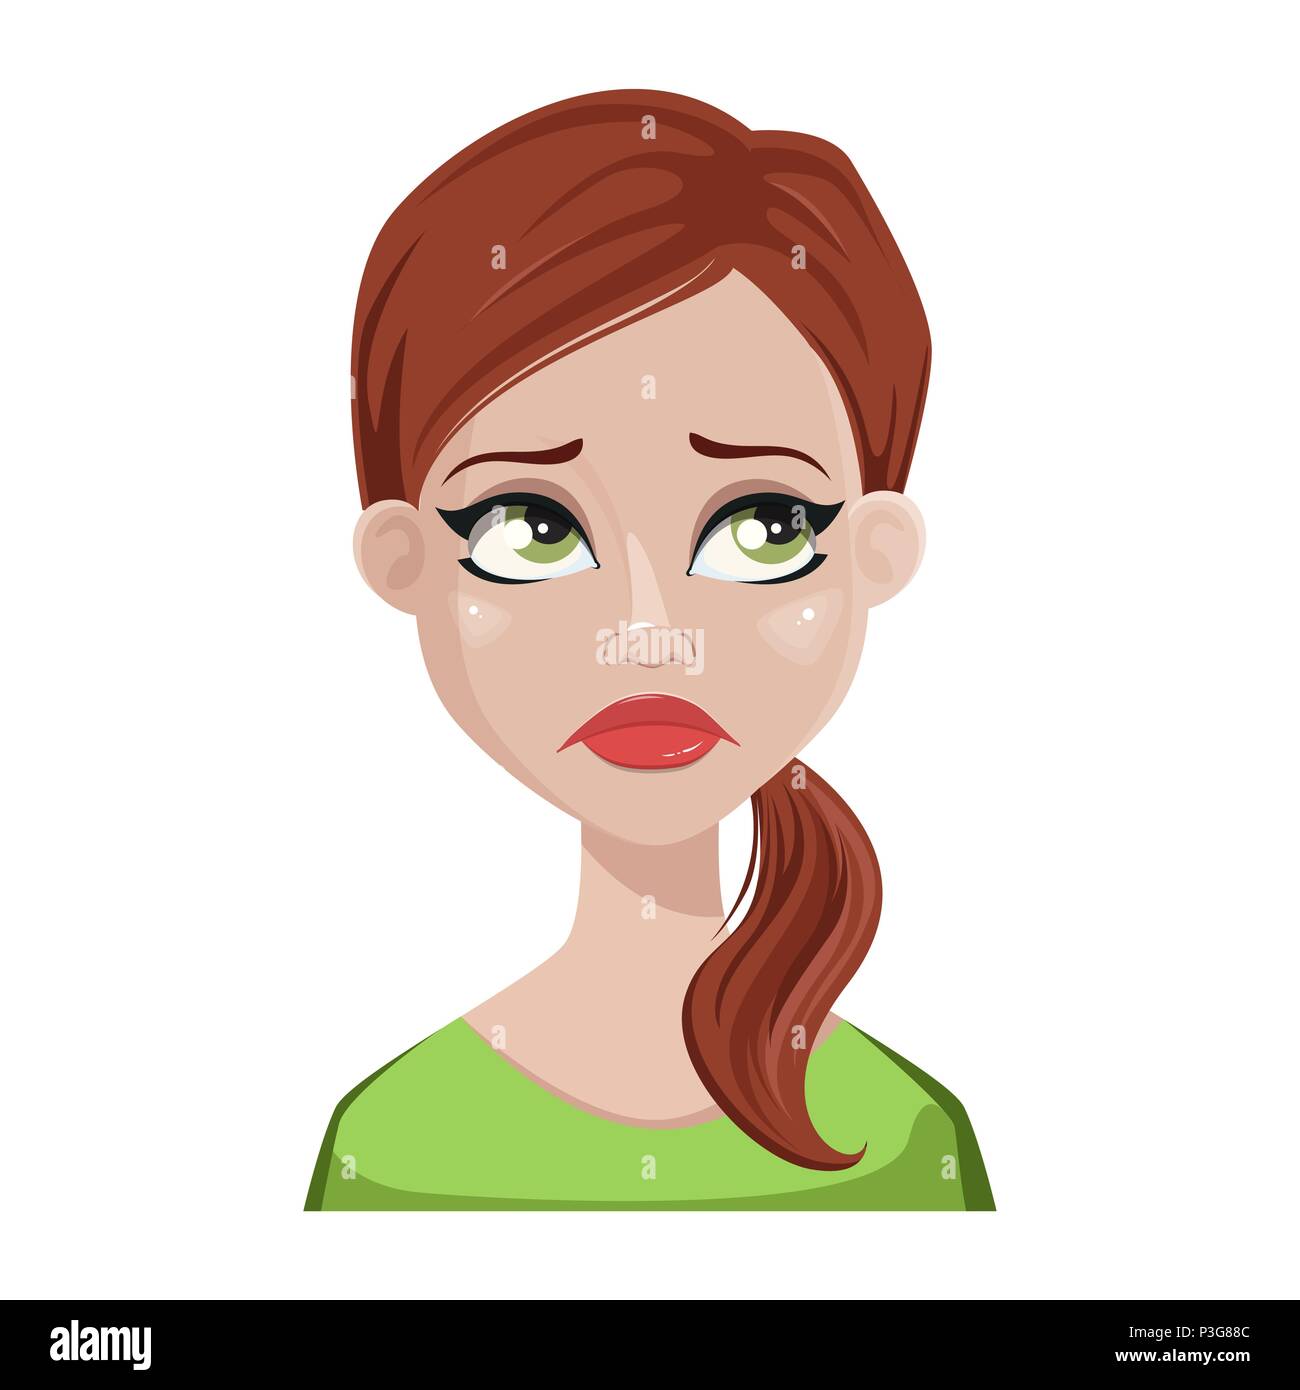 Face expression of cleaner woman with brown hair. Female emotion ...